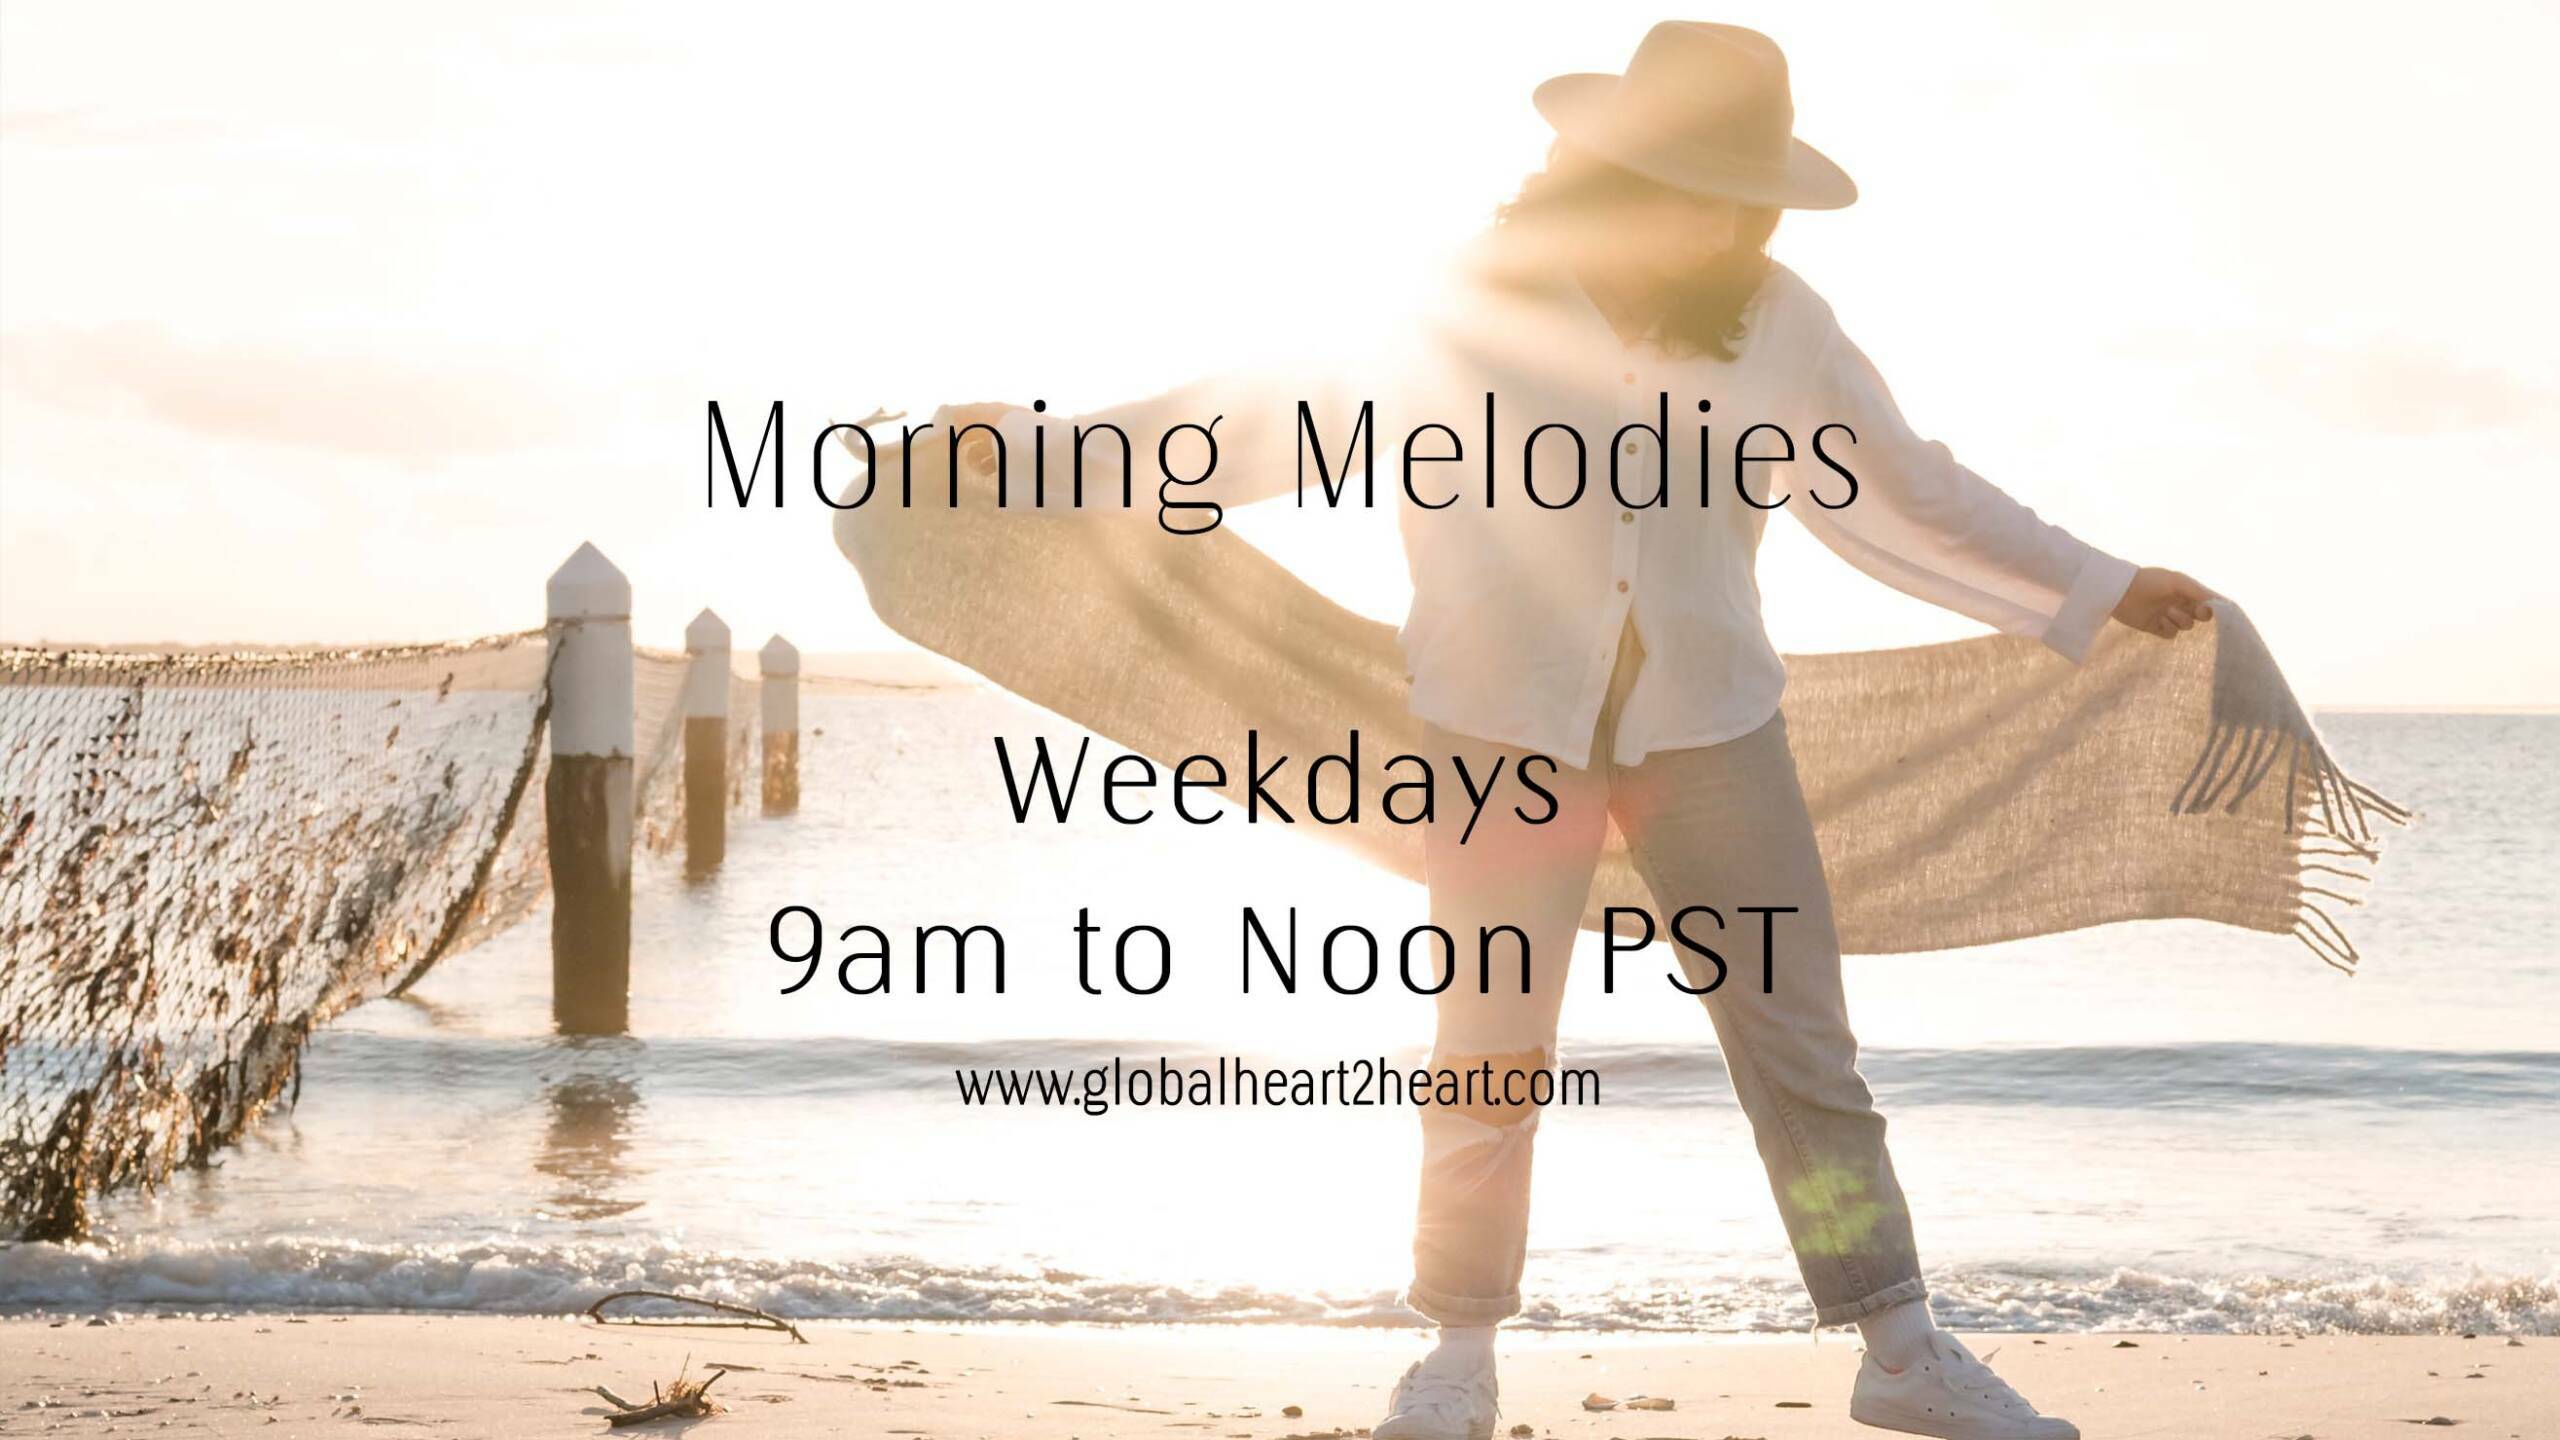 Global Heart 2 Heart Morning Melodies 9am To12 pm